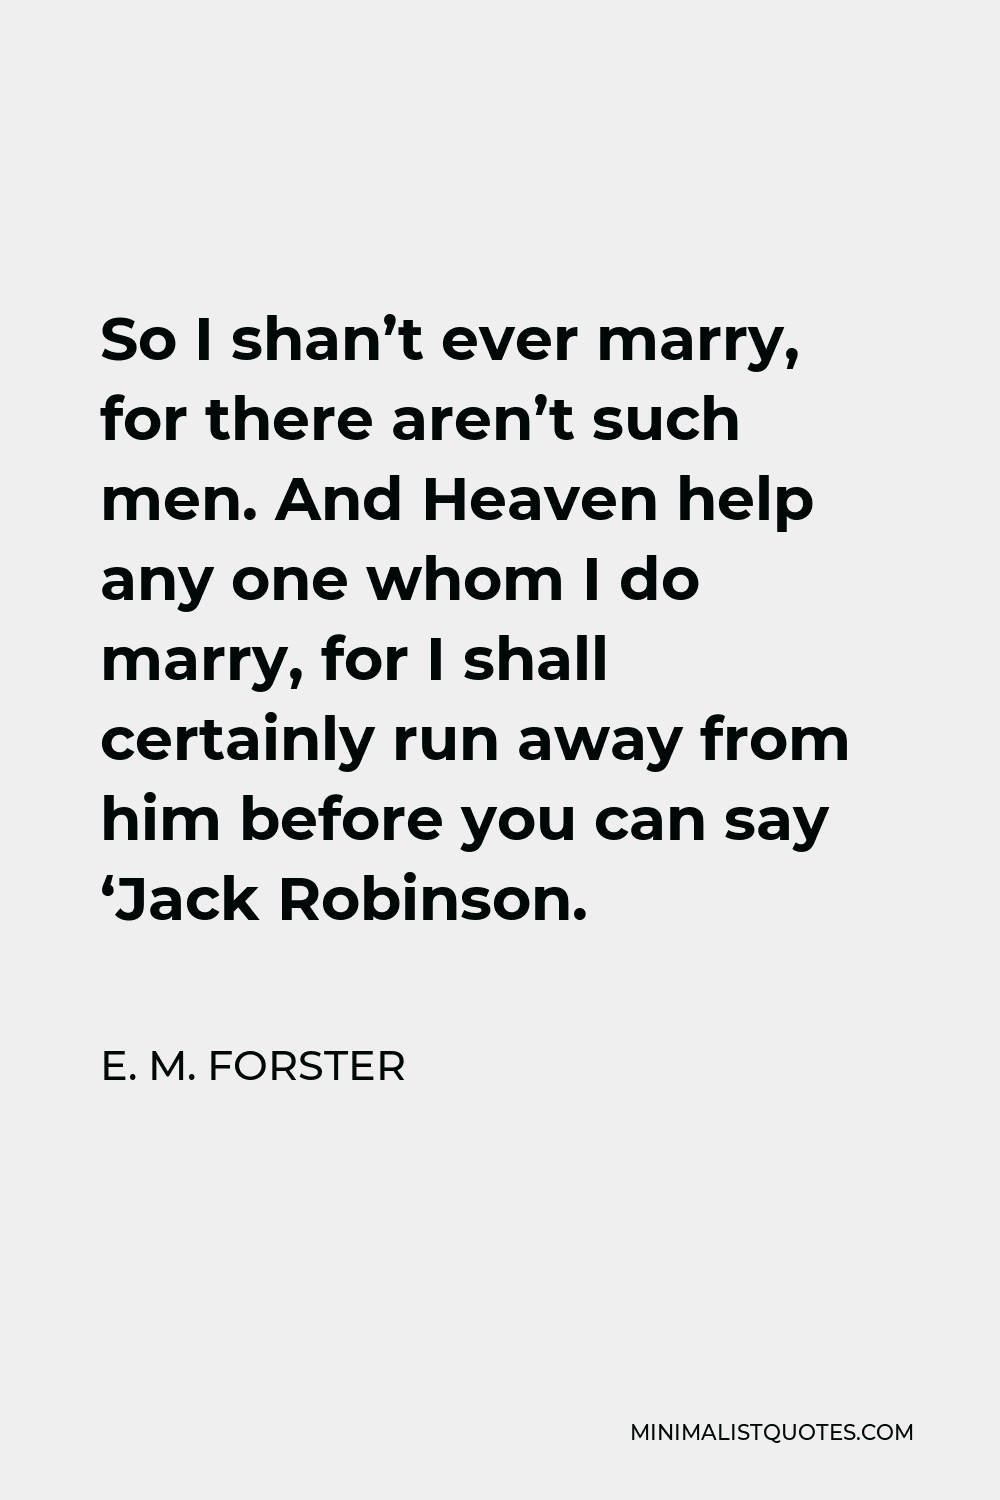 E. M. Forster Quote - So I shan’t ever marry, for there aren’t such men. And Heaven help any one whom I do marry, for I shall certainly run away from him before you can say ‘Jack Robinson.